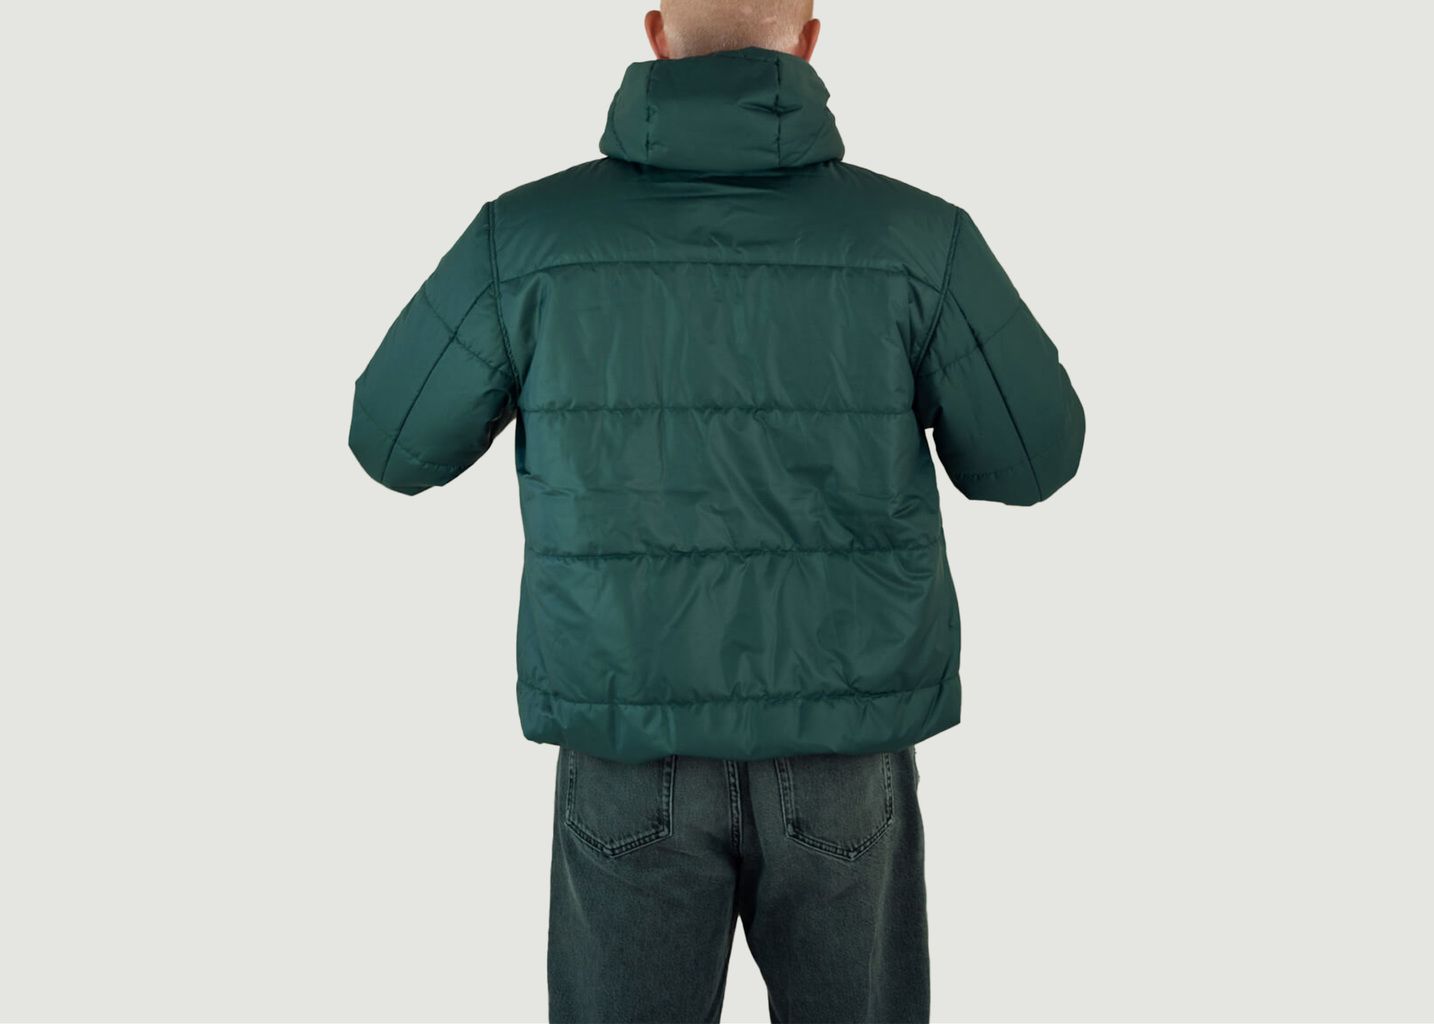 The relief down jacket - Hopaal